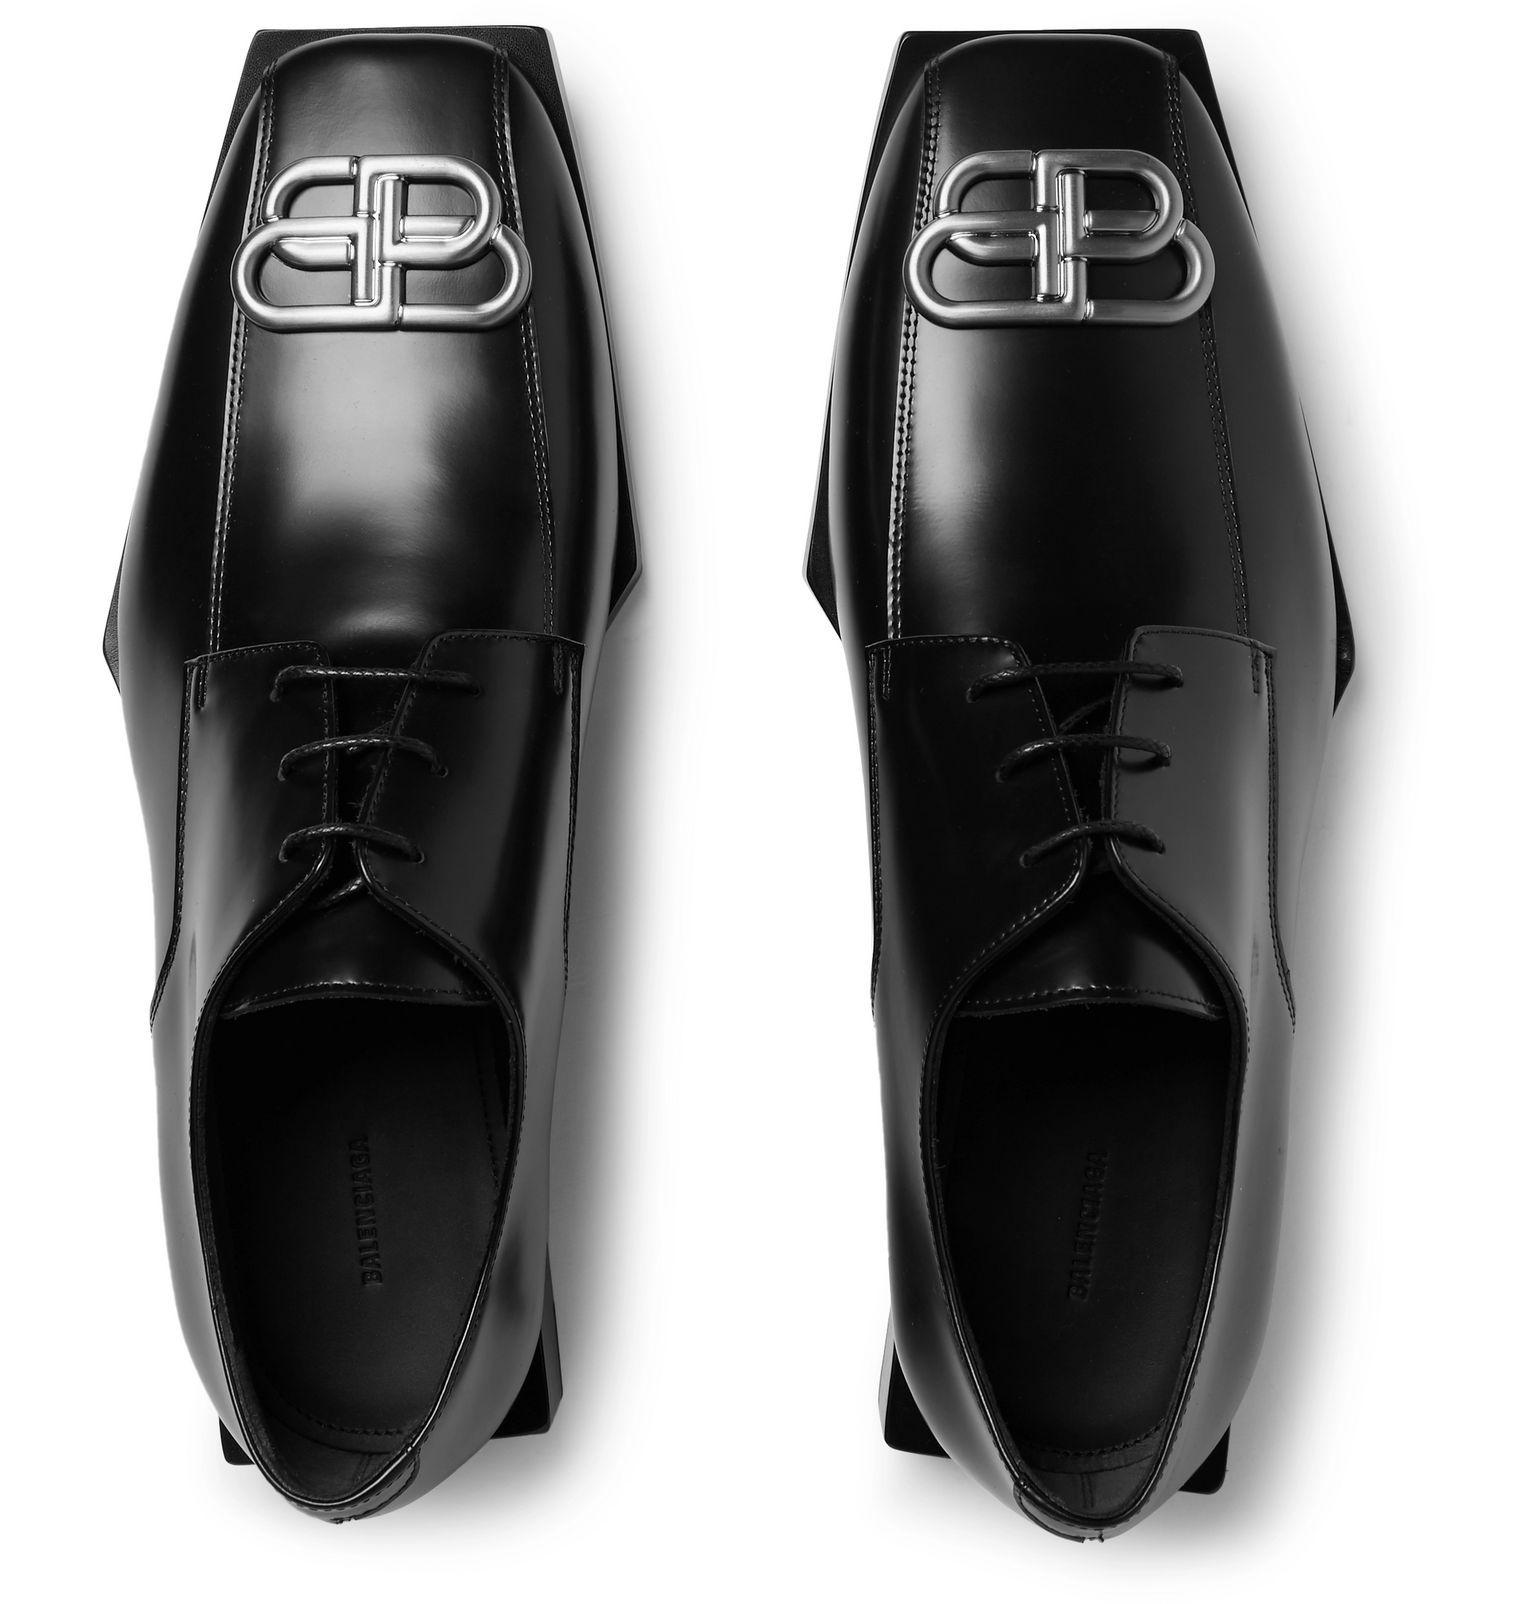 Balenciaga derby shoe in glazed calf leather. Features squared toe and block heel (approx. 1